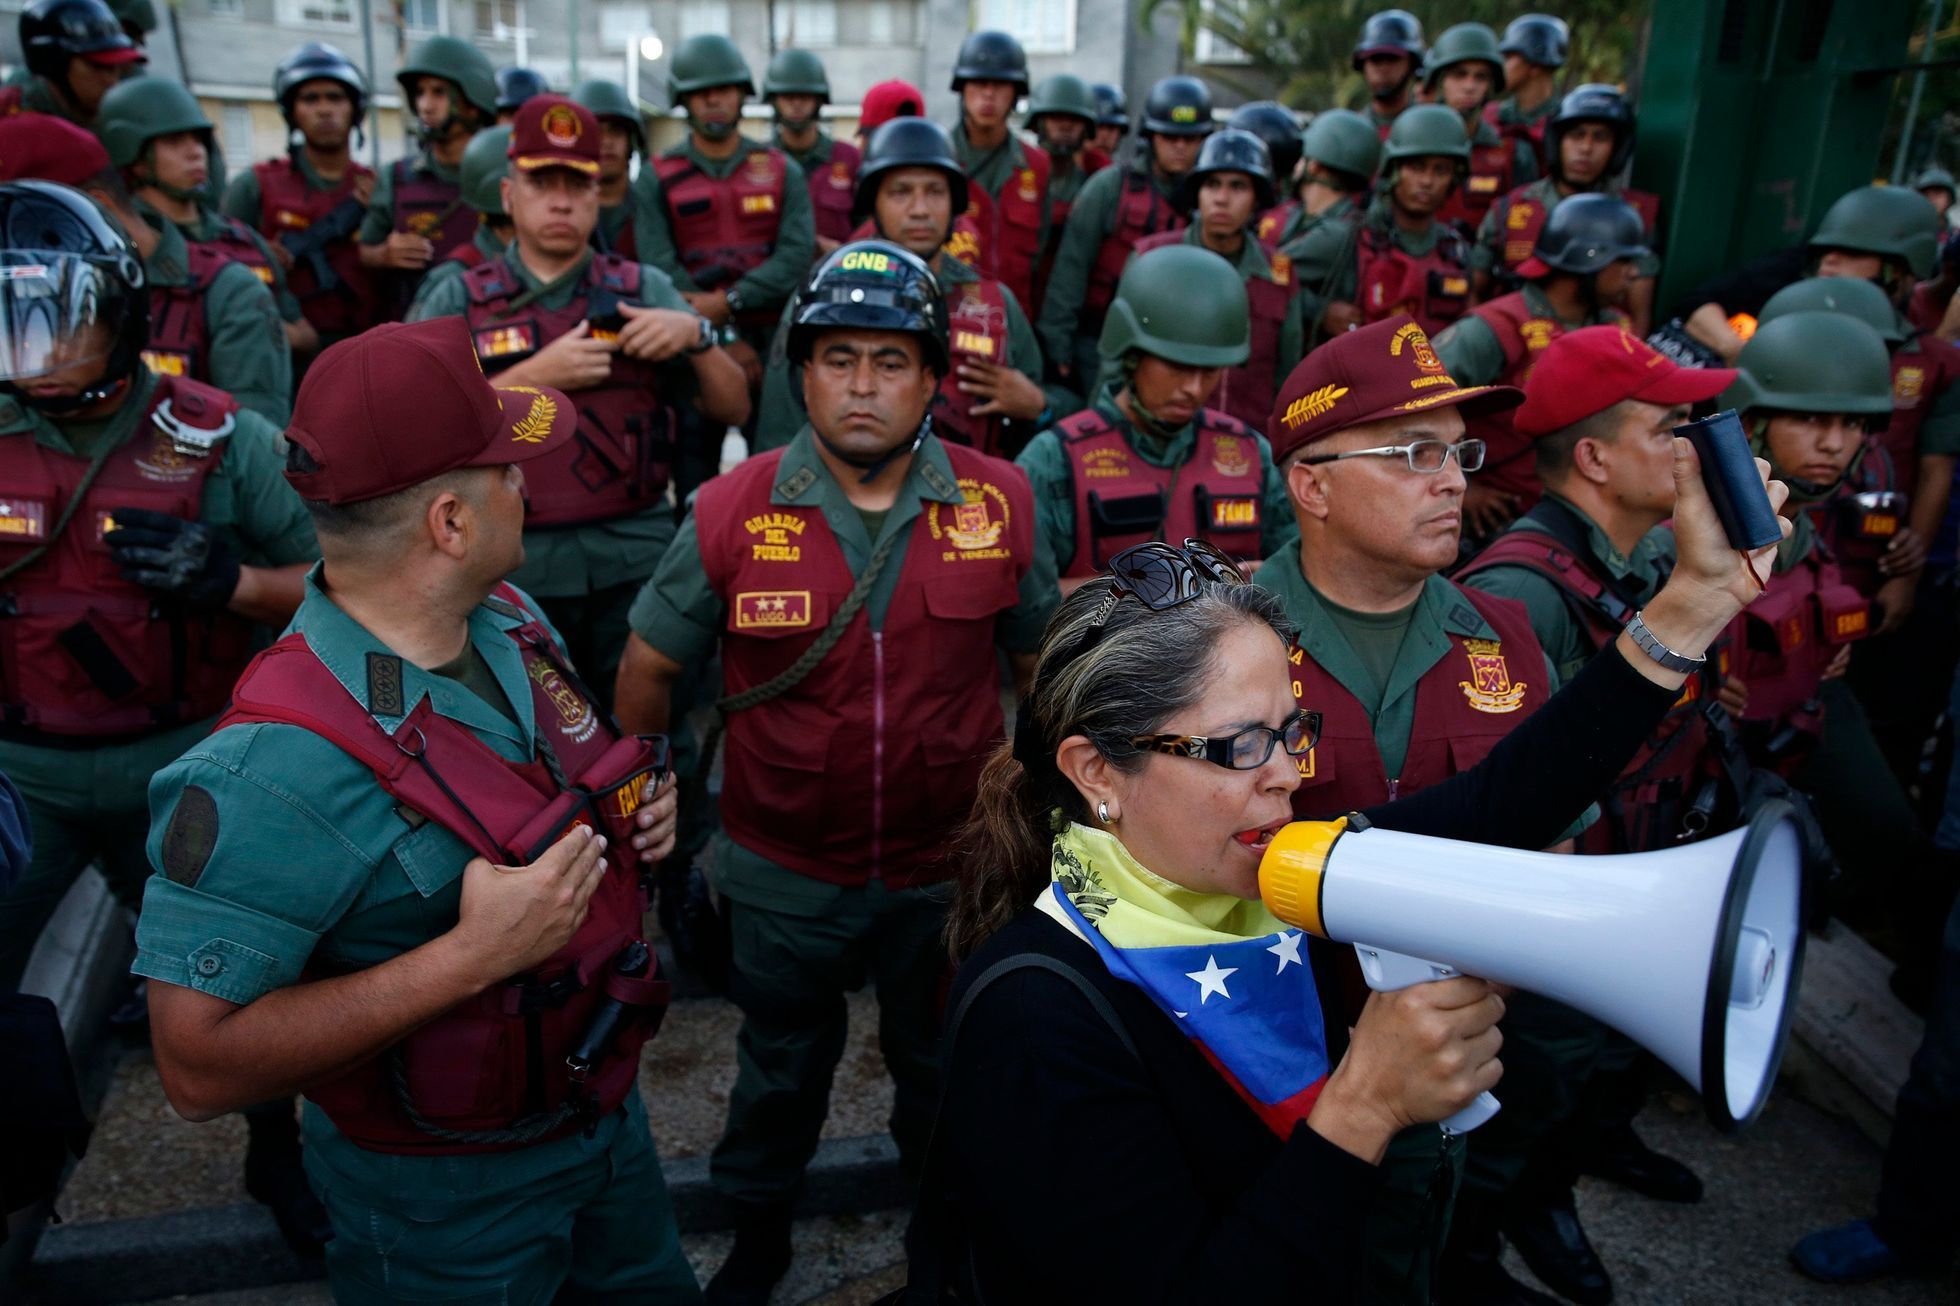 An opposition supporter speaks in front of National Guards during a protest in Caracas